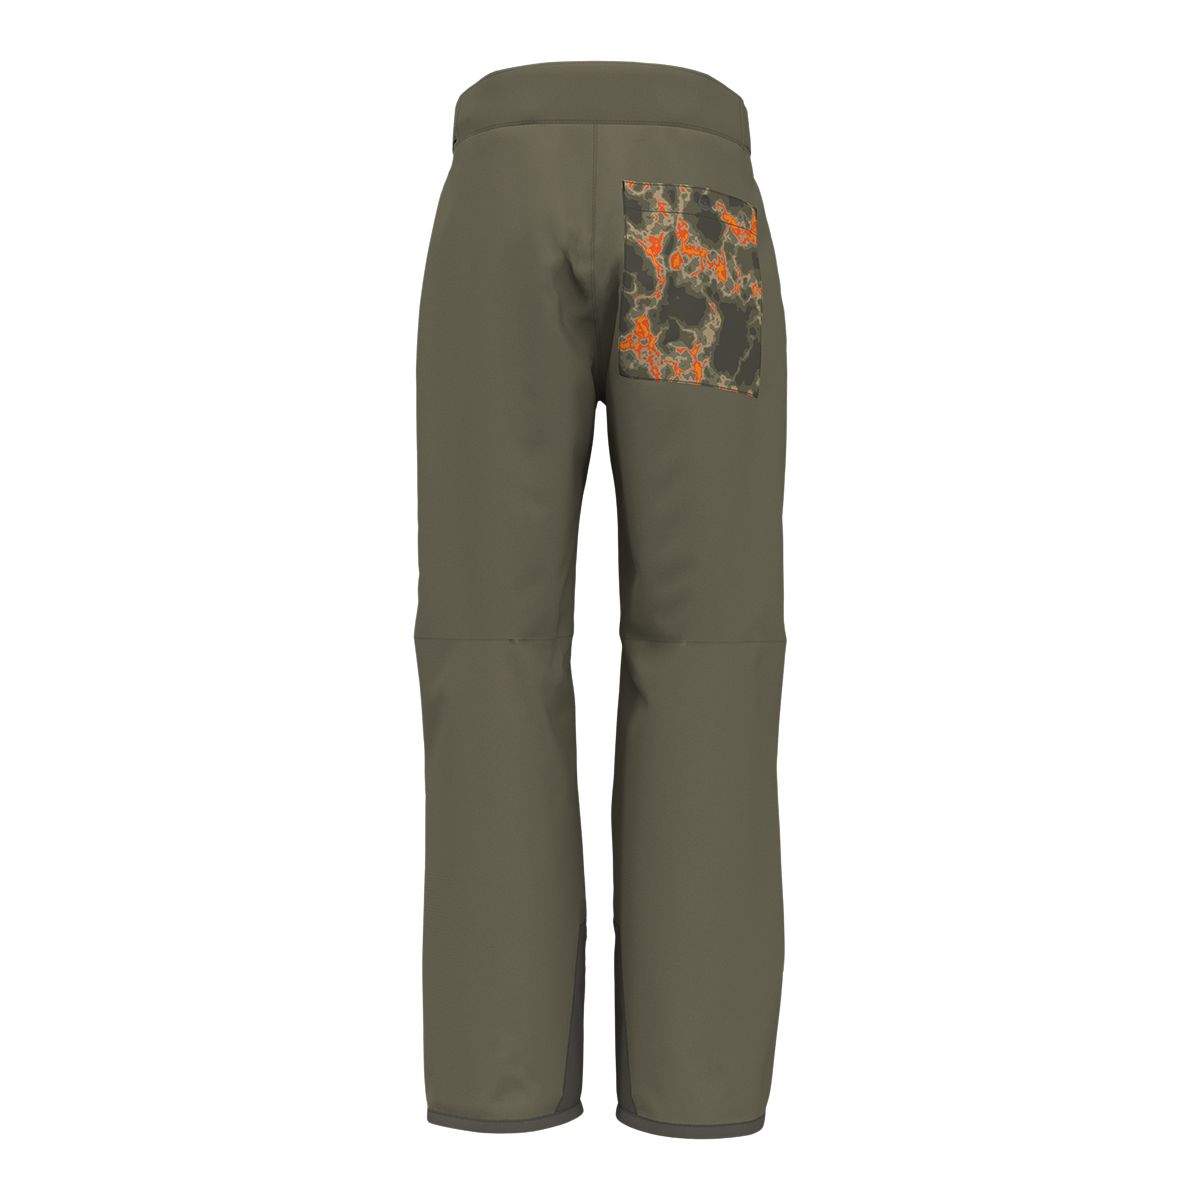 THE NORTH FACE W FREEDOM INS PANT - The Hardwear Company